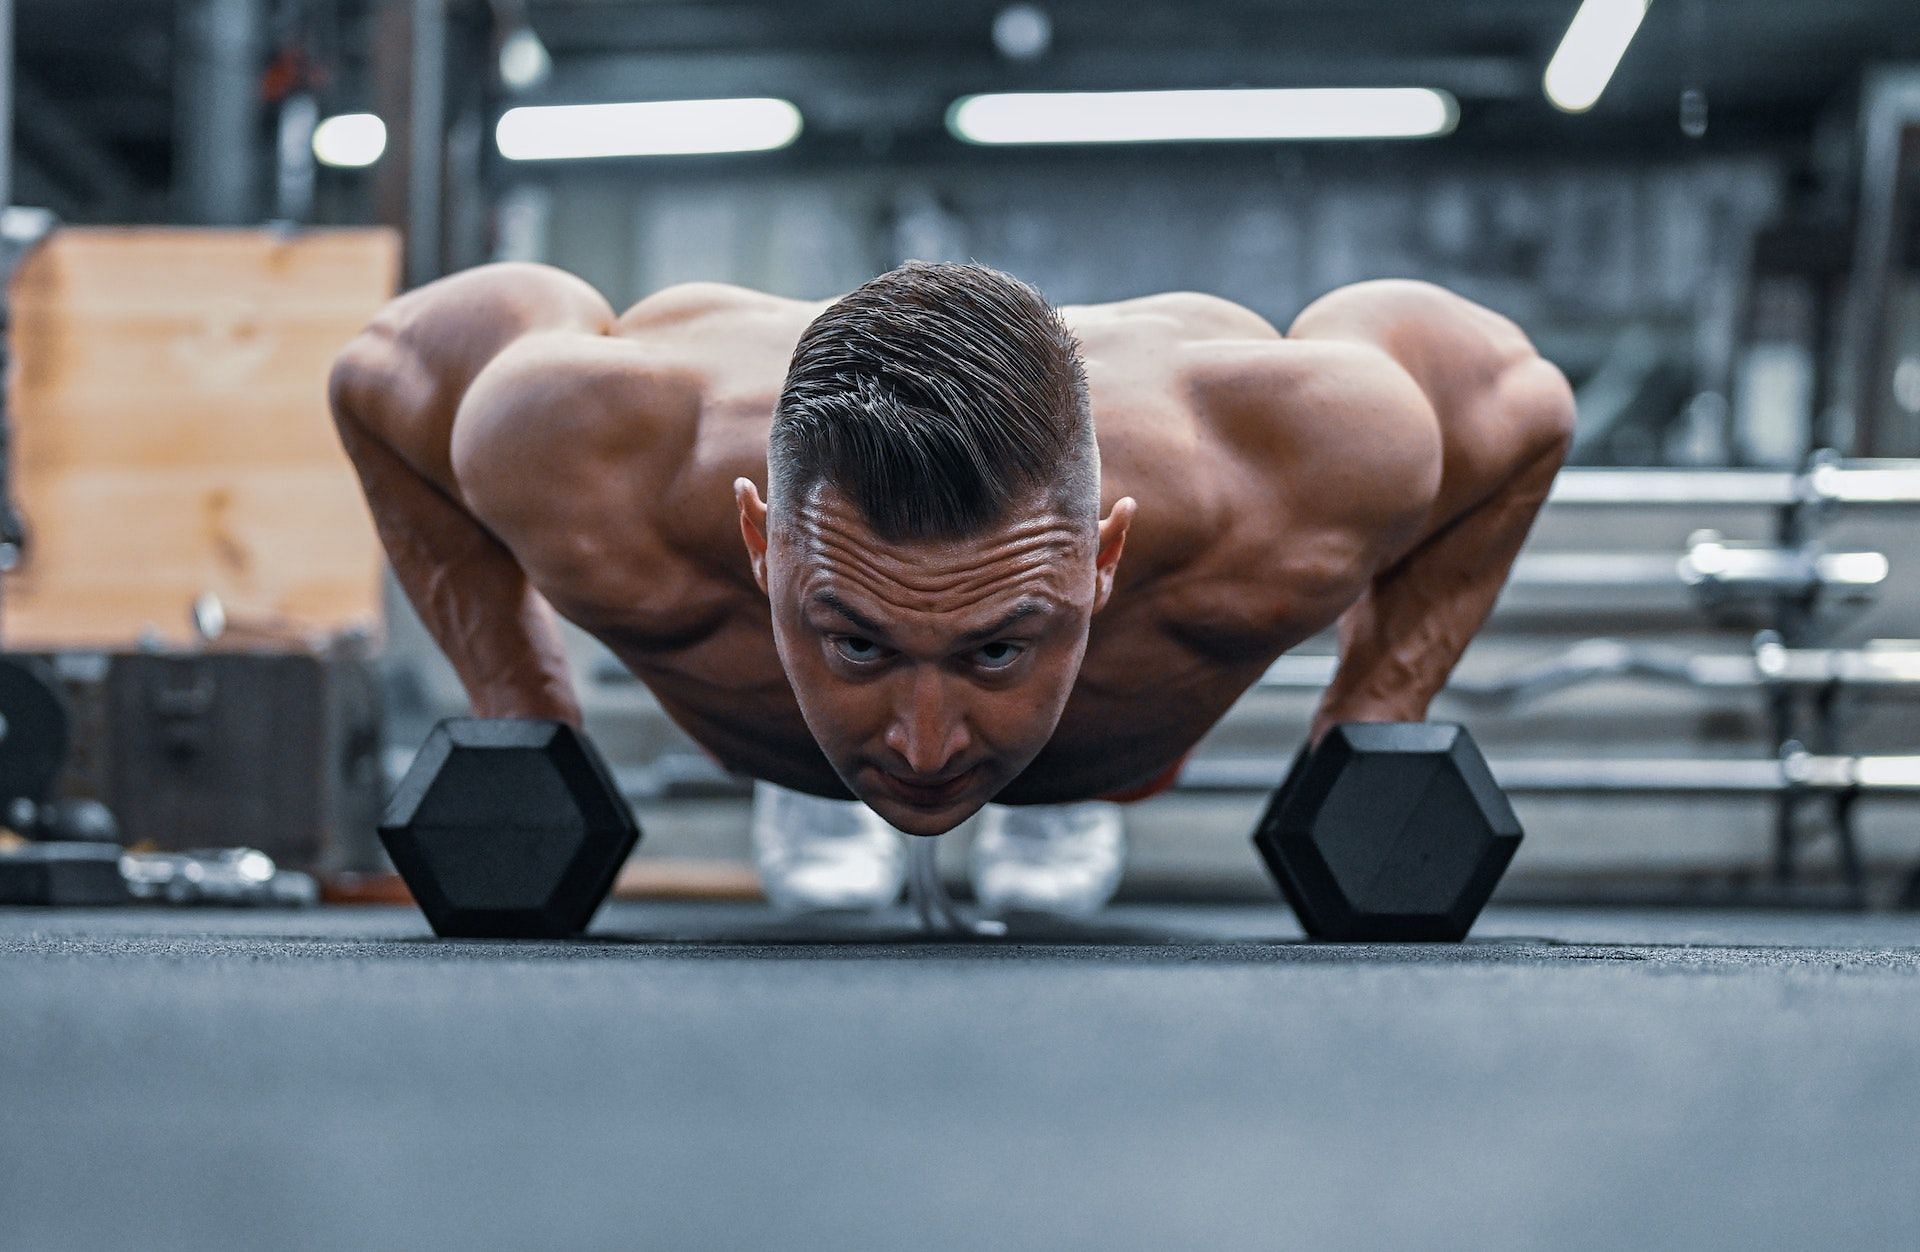 Ab workouts with weights strengthen the entire core muscles. (Photo via Pexels/Krzysztof Biernat)